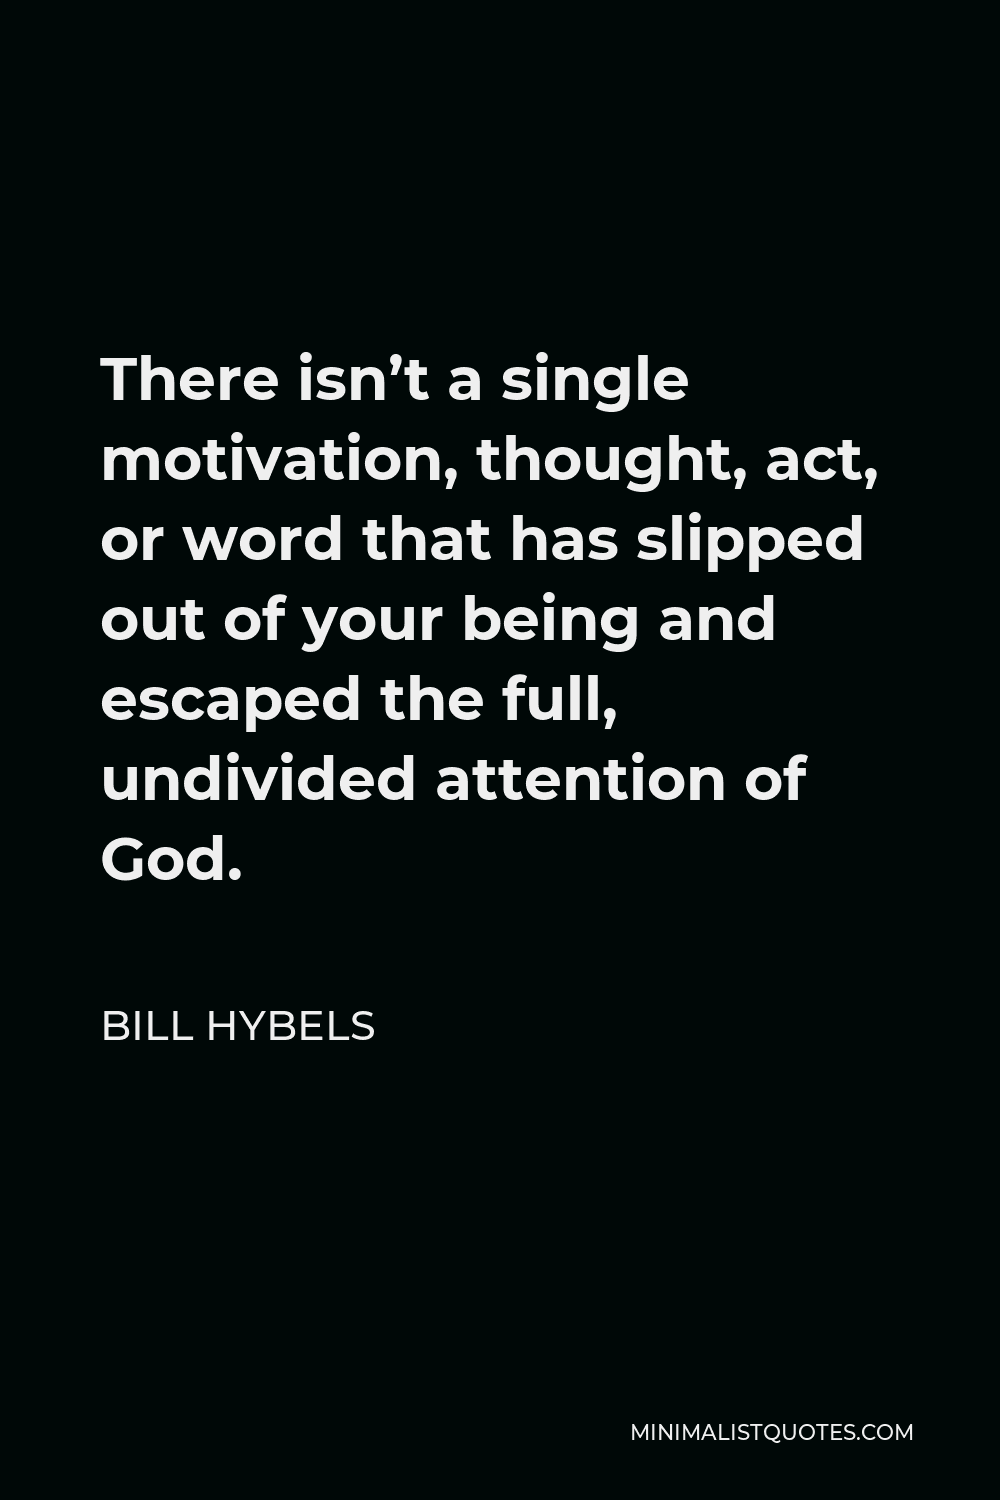 Bill Hybels Quote - There isn’t a single motivation, thought, act, or word that has slipped out of your being and escaped the full, undivided attention of God.